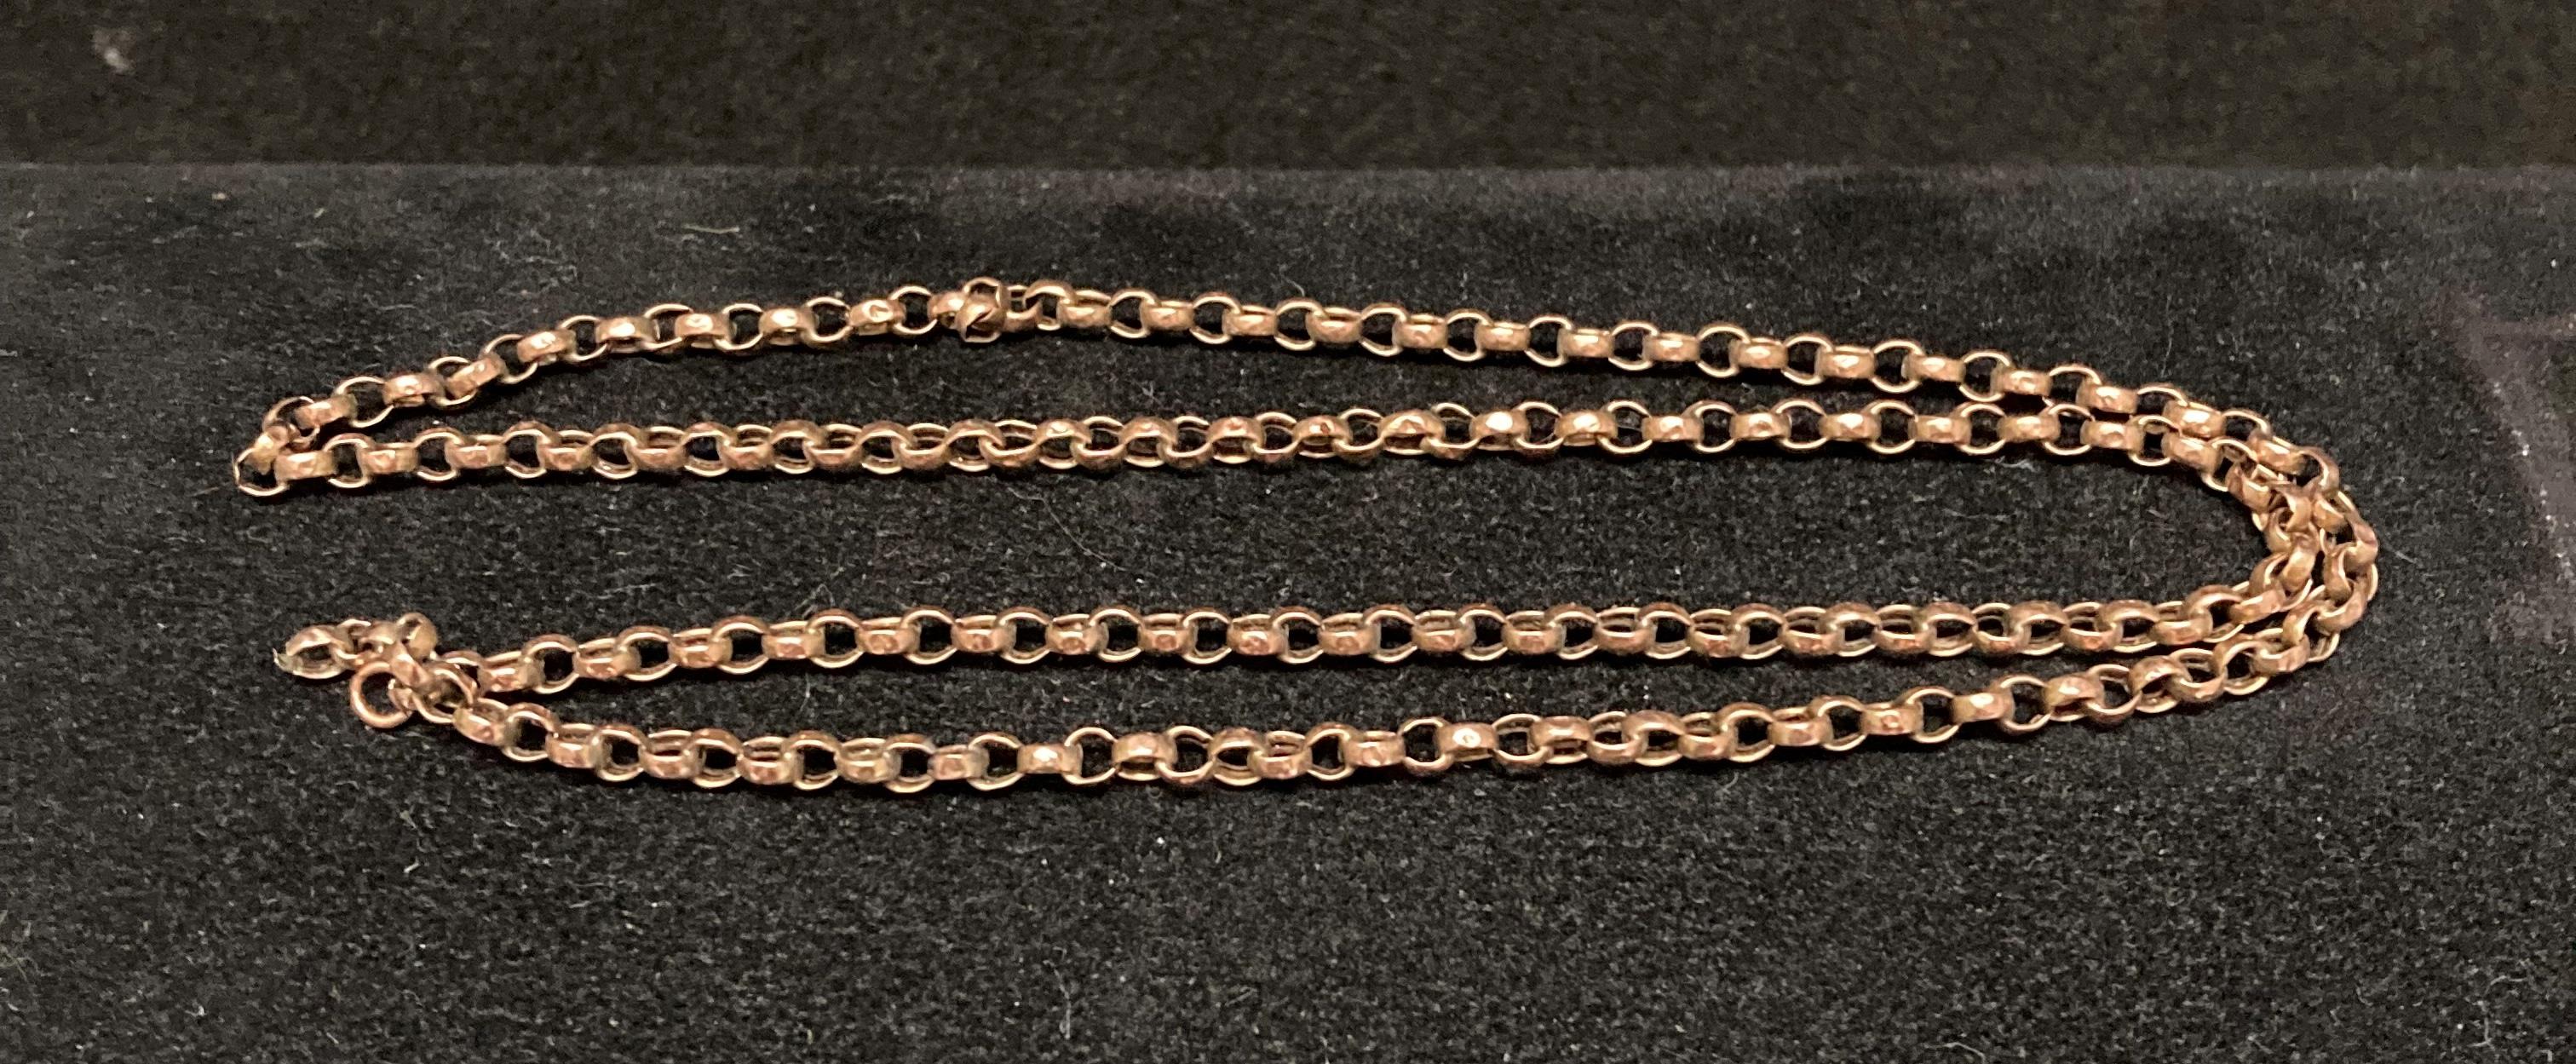 Gold coloured chain, hallmarks visible, no clasp, approximate weight 3.